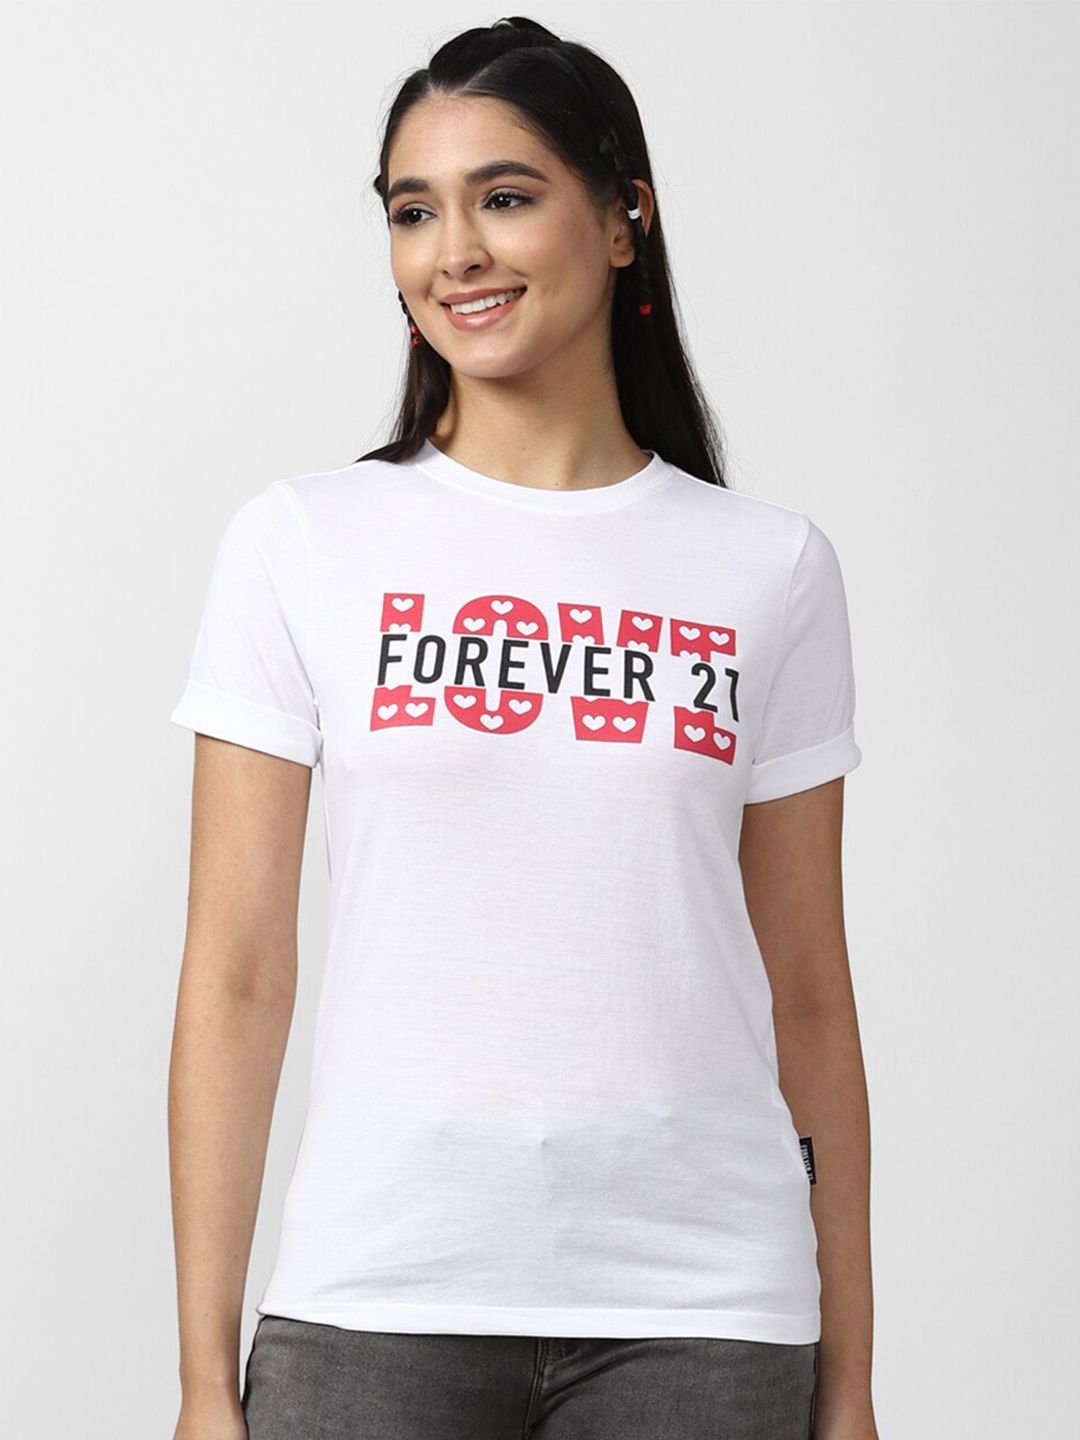 FOREVER 21 White Graphic Print Round Neck Cotton Blend Top Price in India